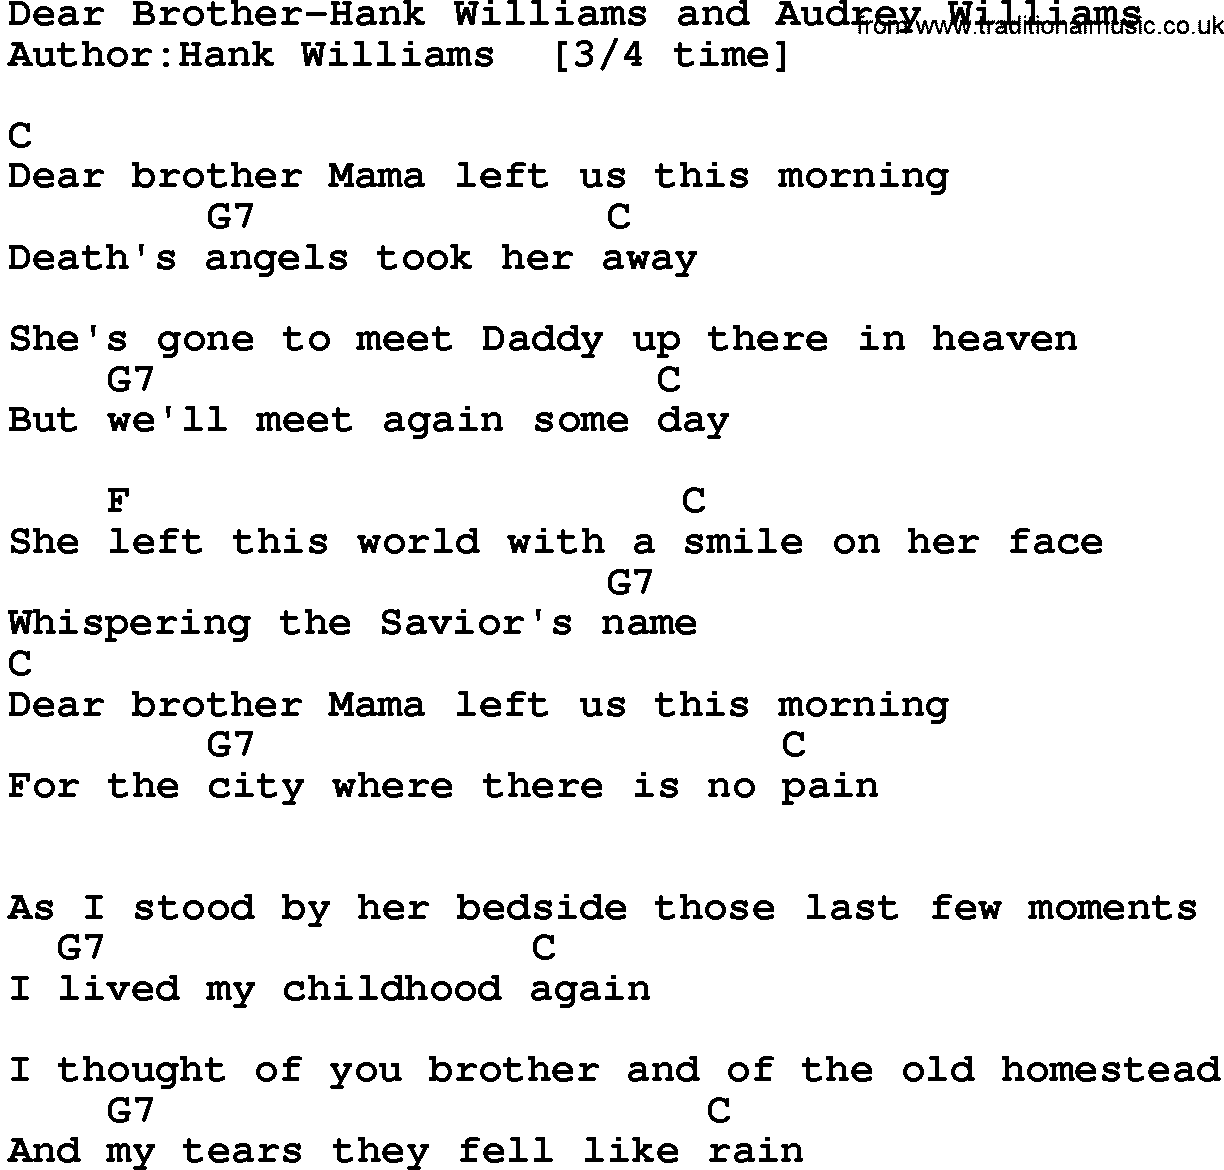 Country music song: Dear Brother-Hank Williams And Audrey Williams lyrics and chords